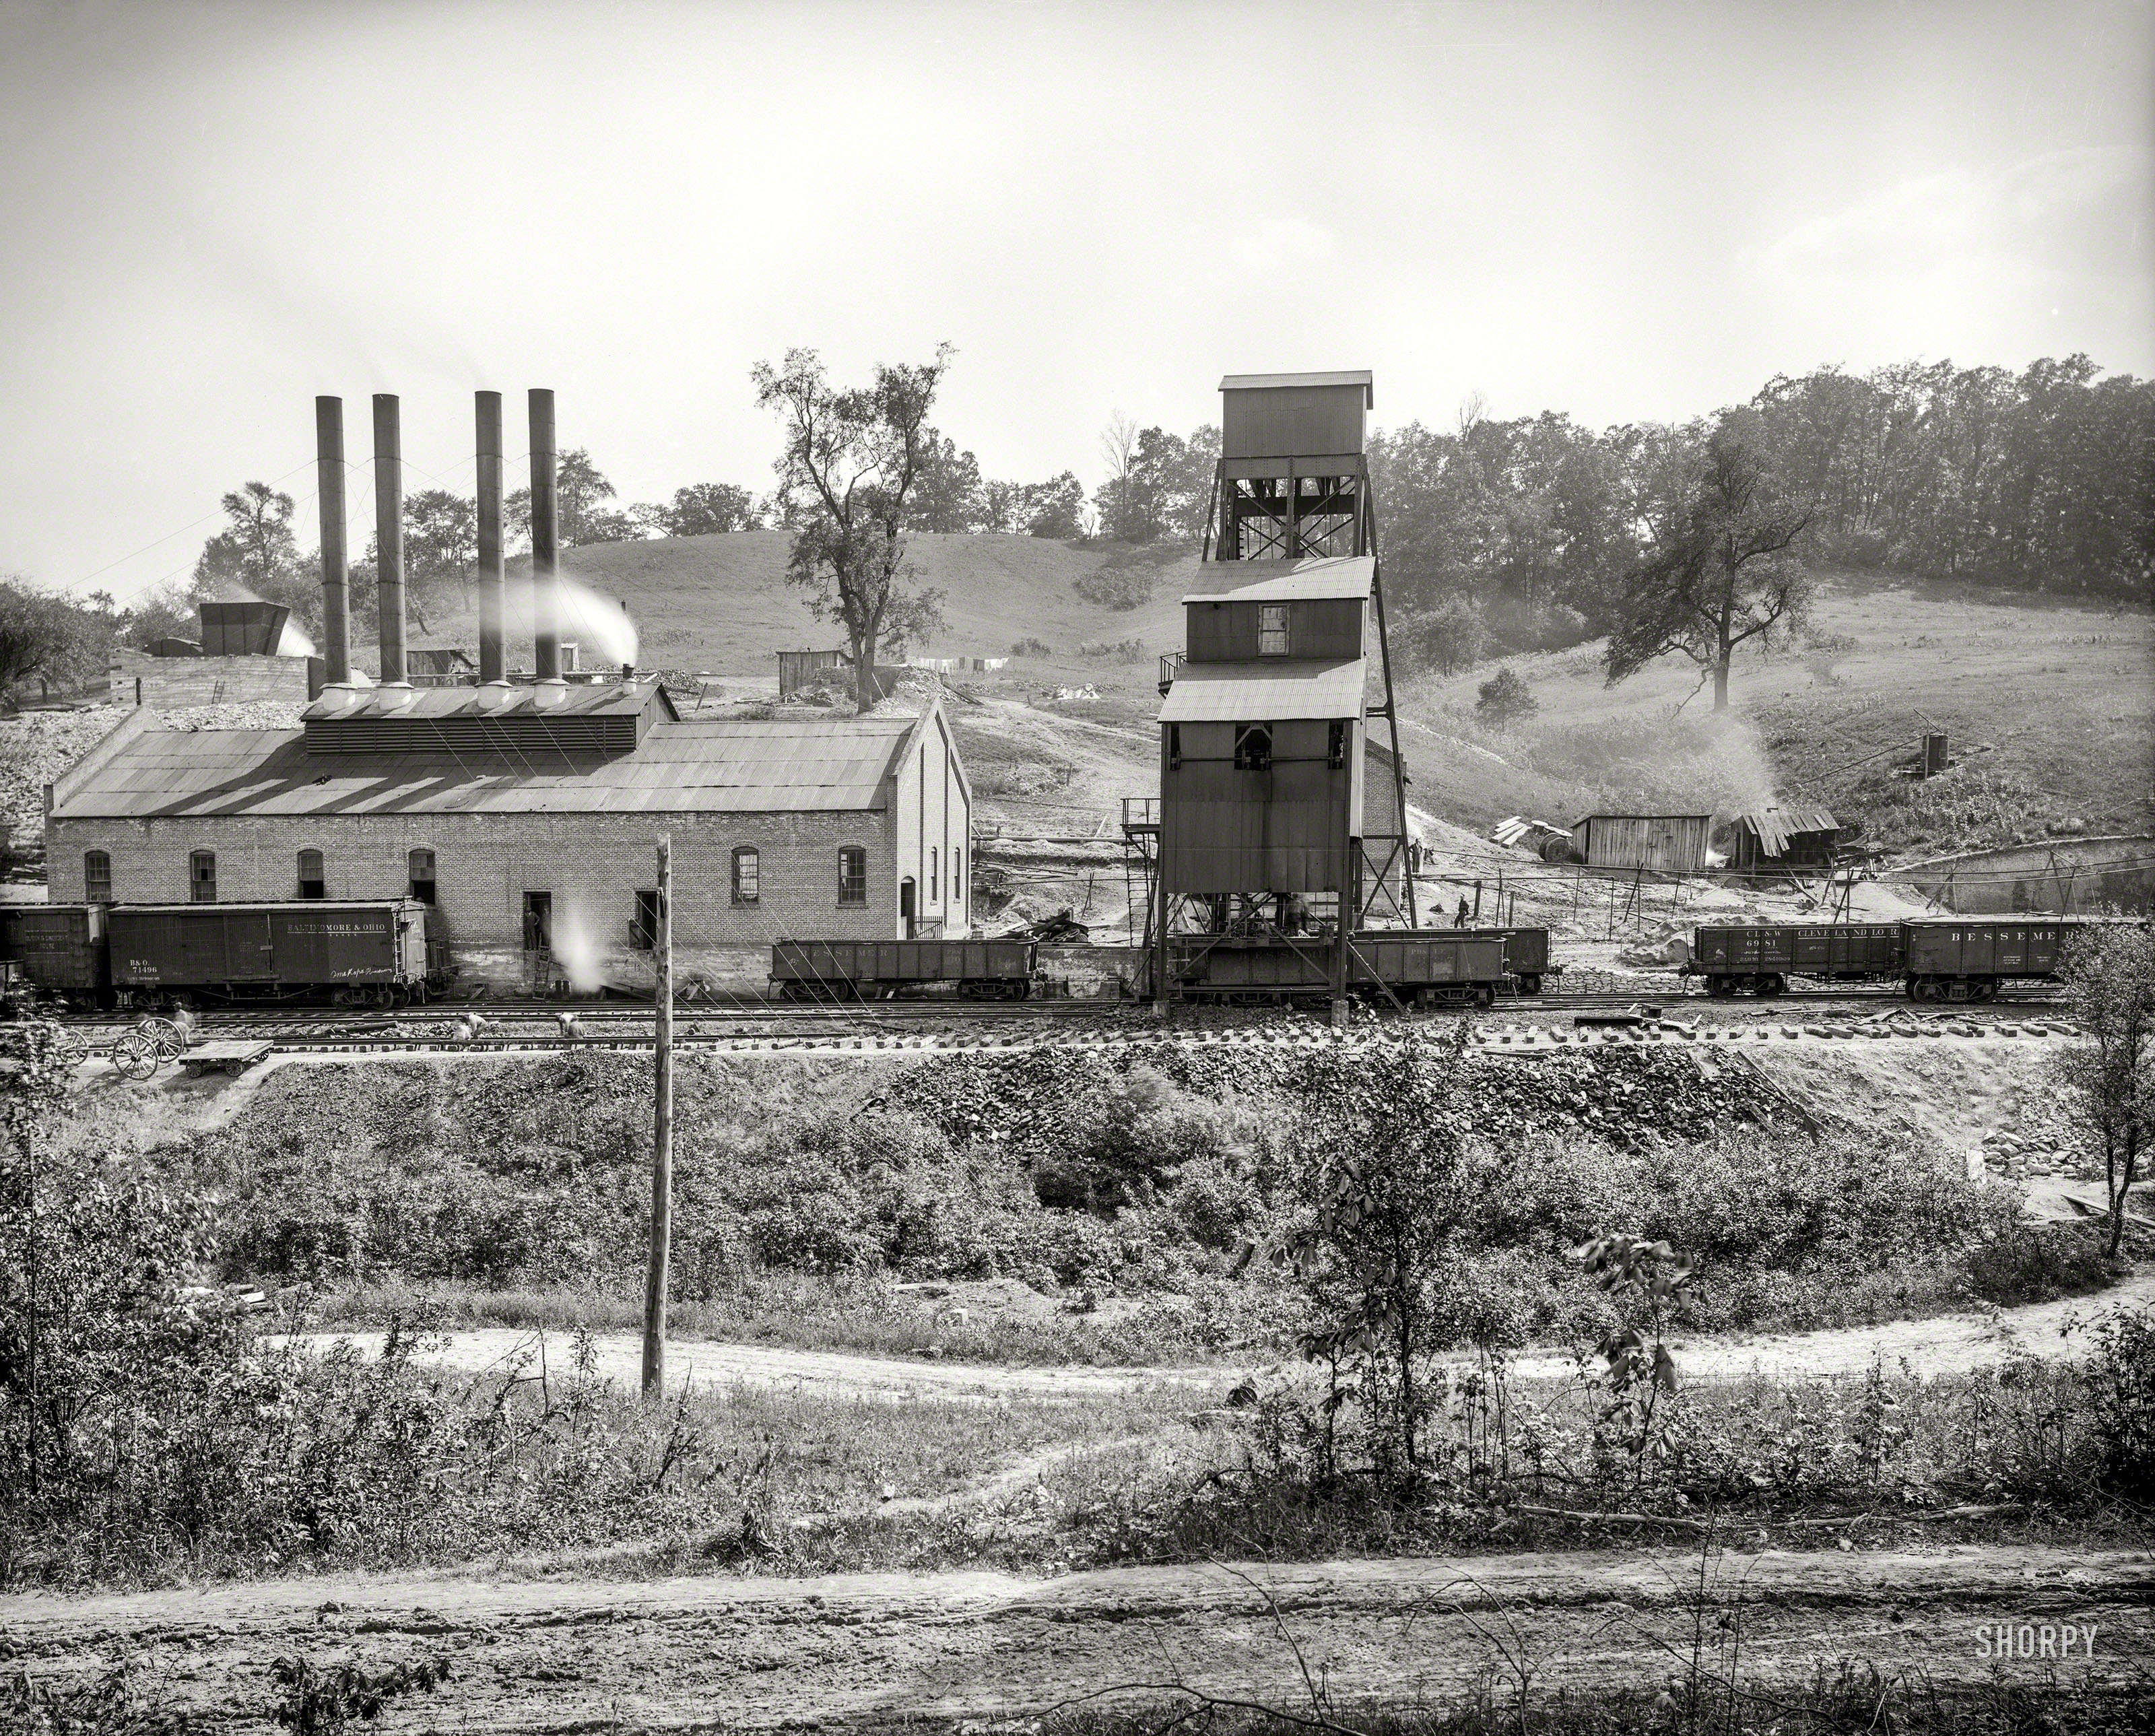 Circa 1910. "Coal loading at Ford Collieries, Allegheny County, Pennsylvania." 8x10 inch dry plate glass negative, Detroit Publishing Company. View full size.